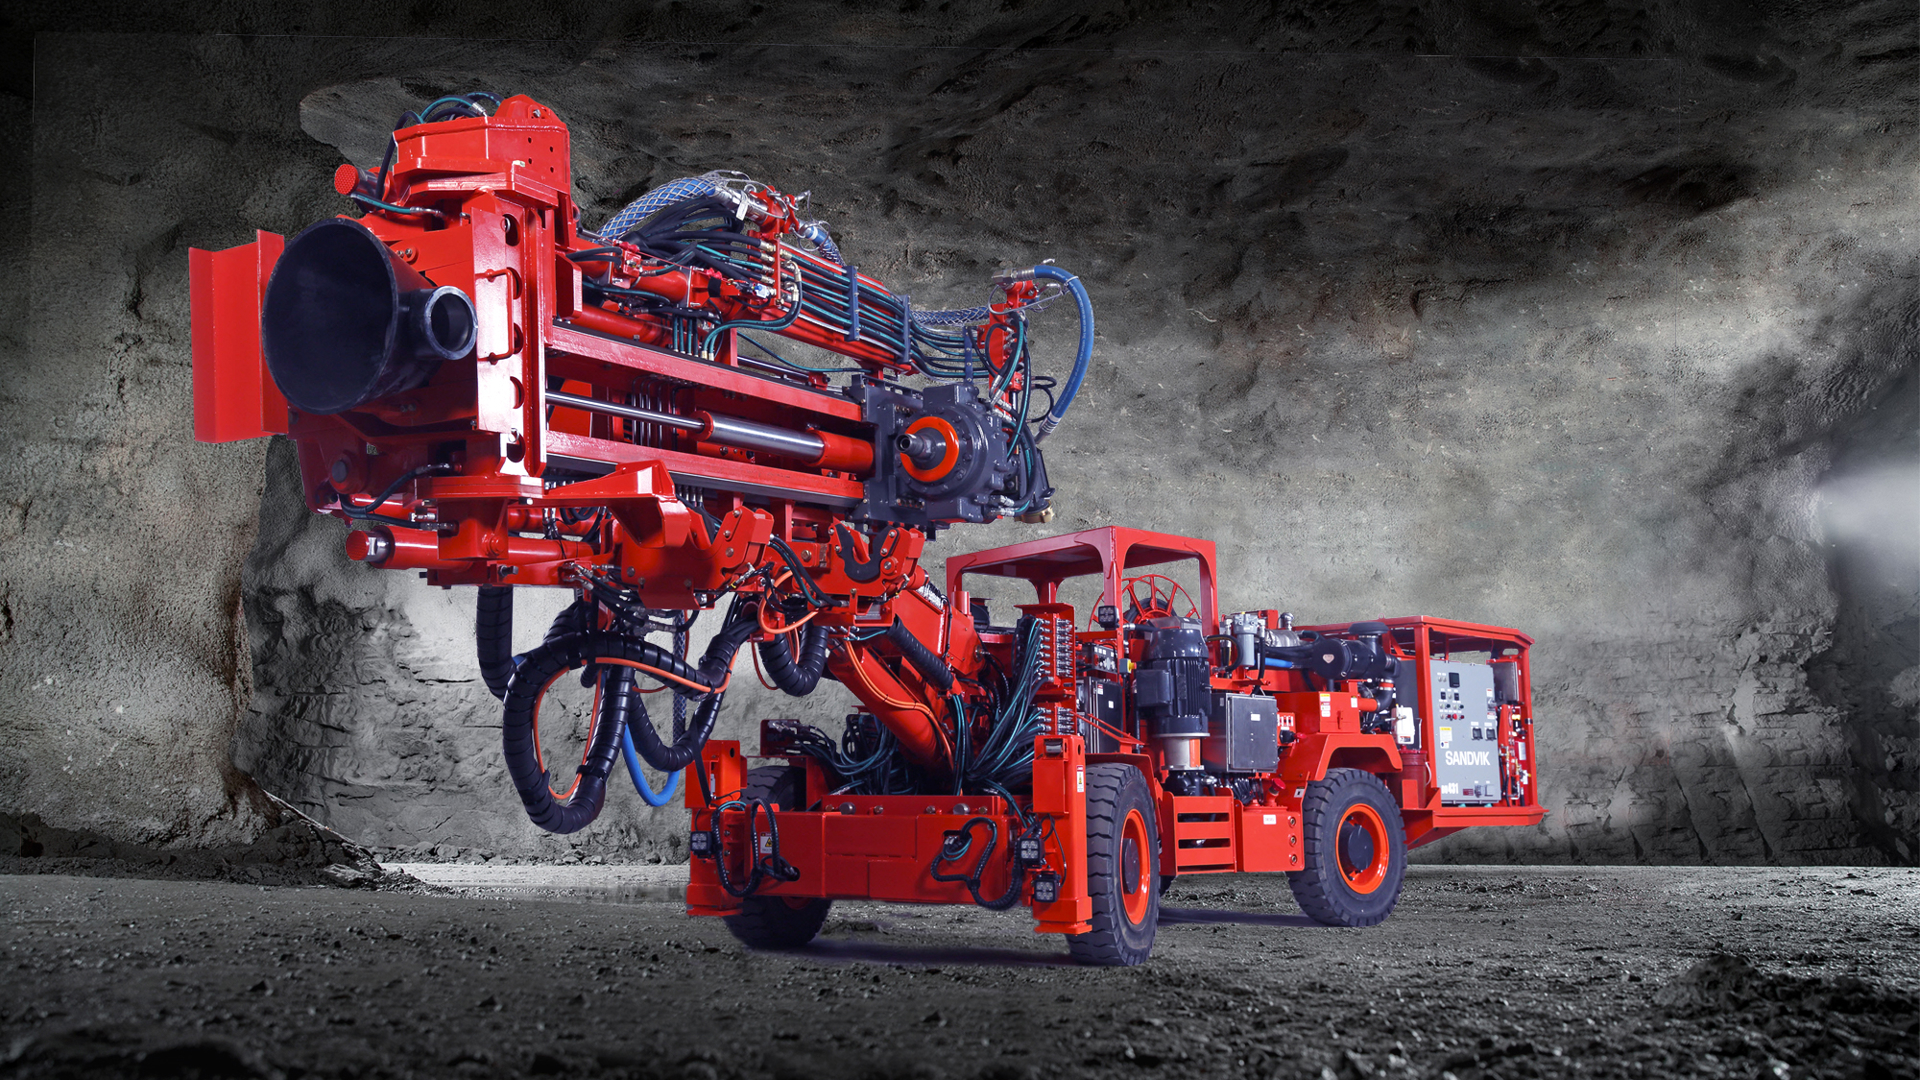 Sandvik DU211-T ITH (In The Hole) Drill Rig For Underground Drilling